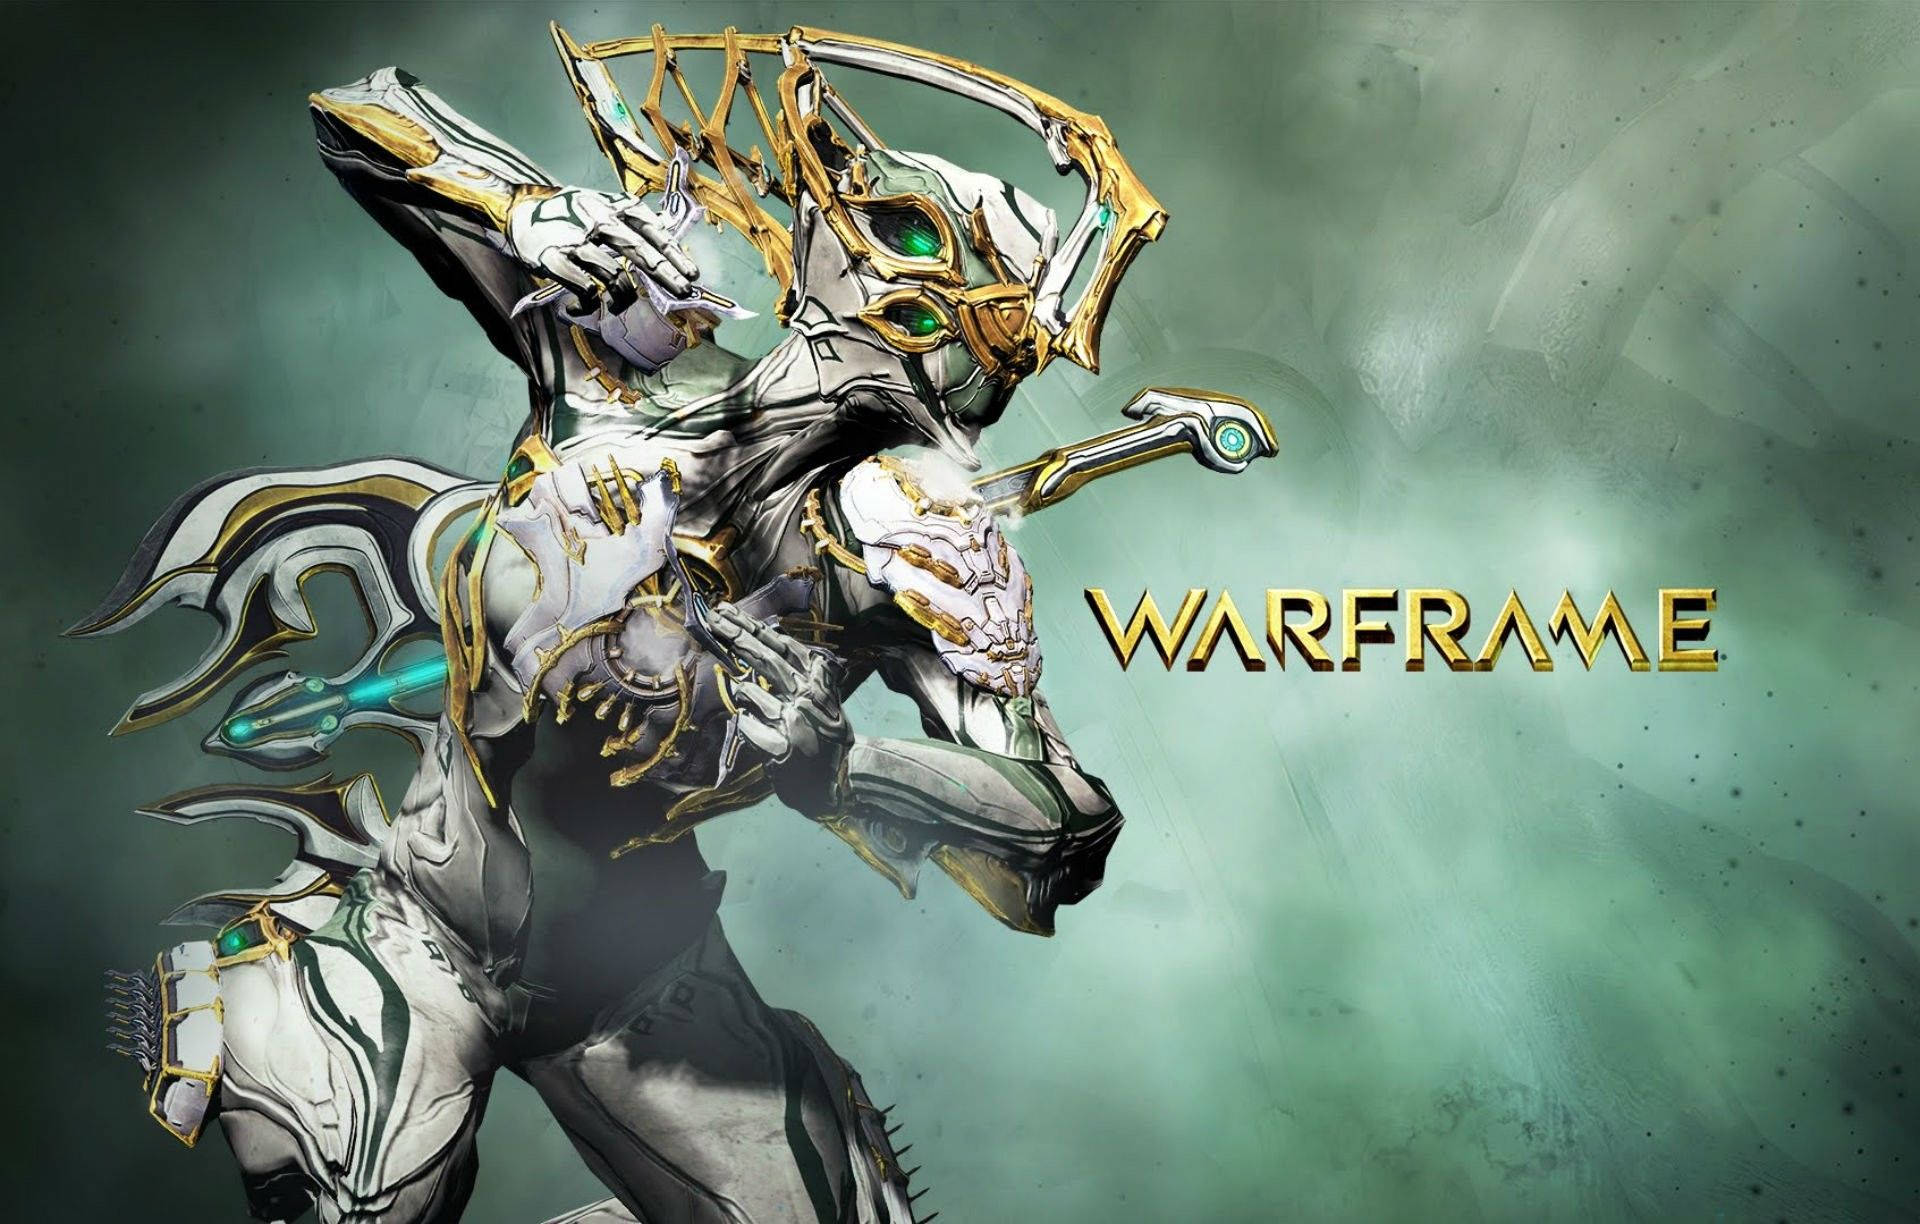 Warframe soldier Volt with white gold armored body and weapon on back wallpaper. 